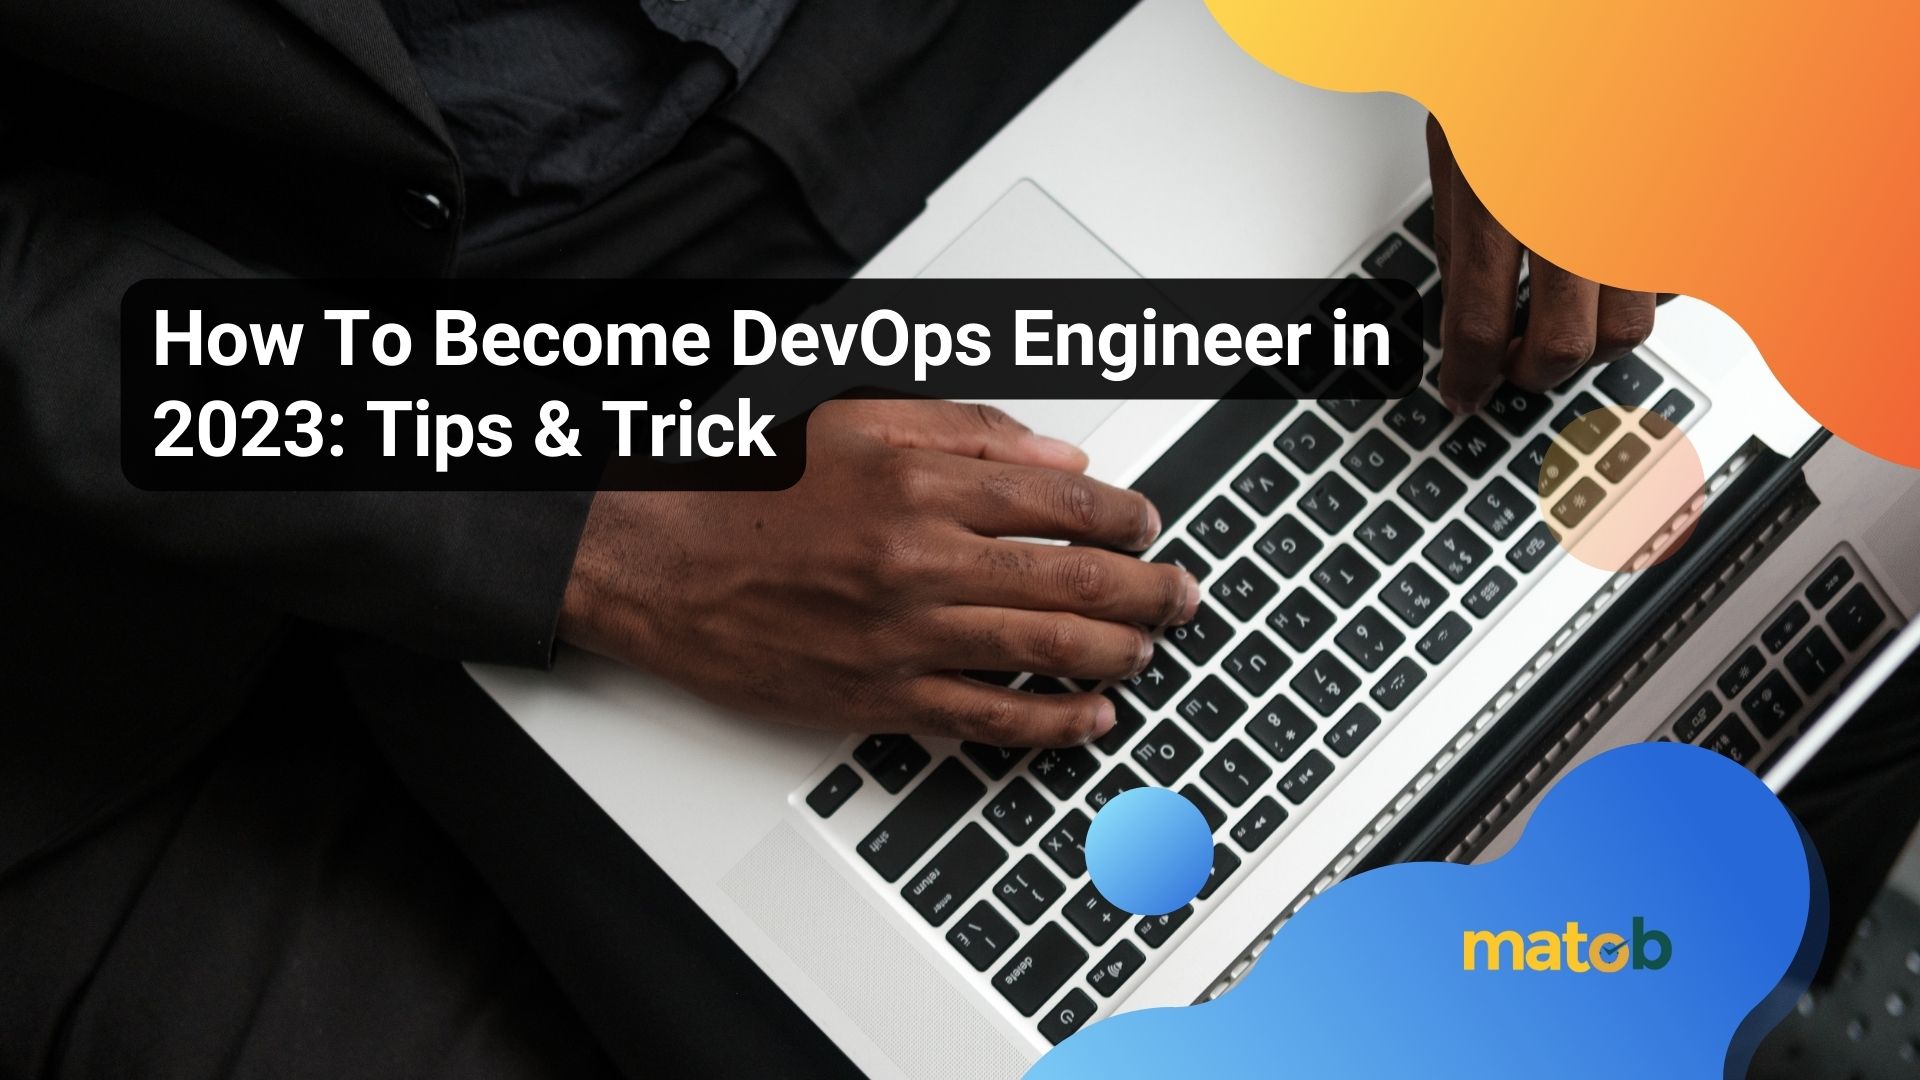 How To Become DevOps Engineer in 2023: Tips & Trick